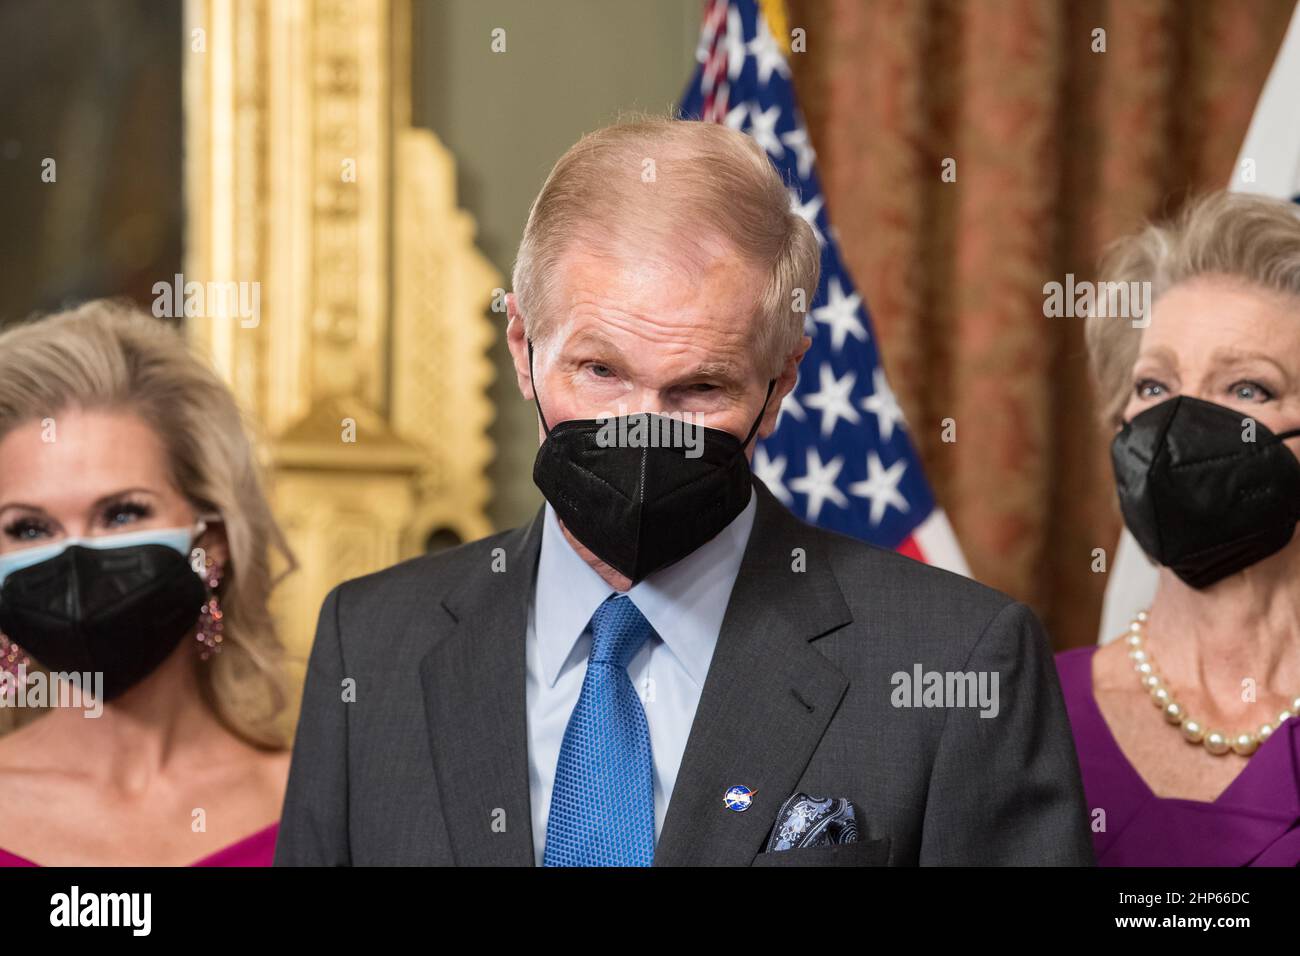 Former Senator Bill Nelson, speaks to media after he was ceremonially sworn-in as the 14th NASA Administrator by Vice President Kamala Harris, as his wife, Grace Nelson, right, held their family Bible, Monday, May 3, 2021, at the Ceremonial Office in the Old Executive Office Building in Washington. Stock Photo